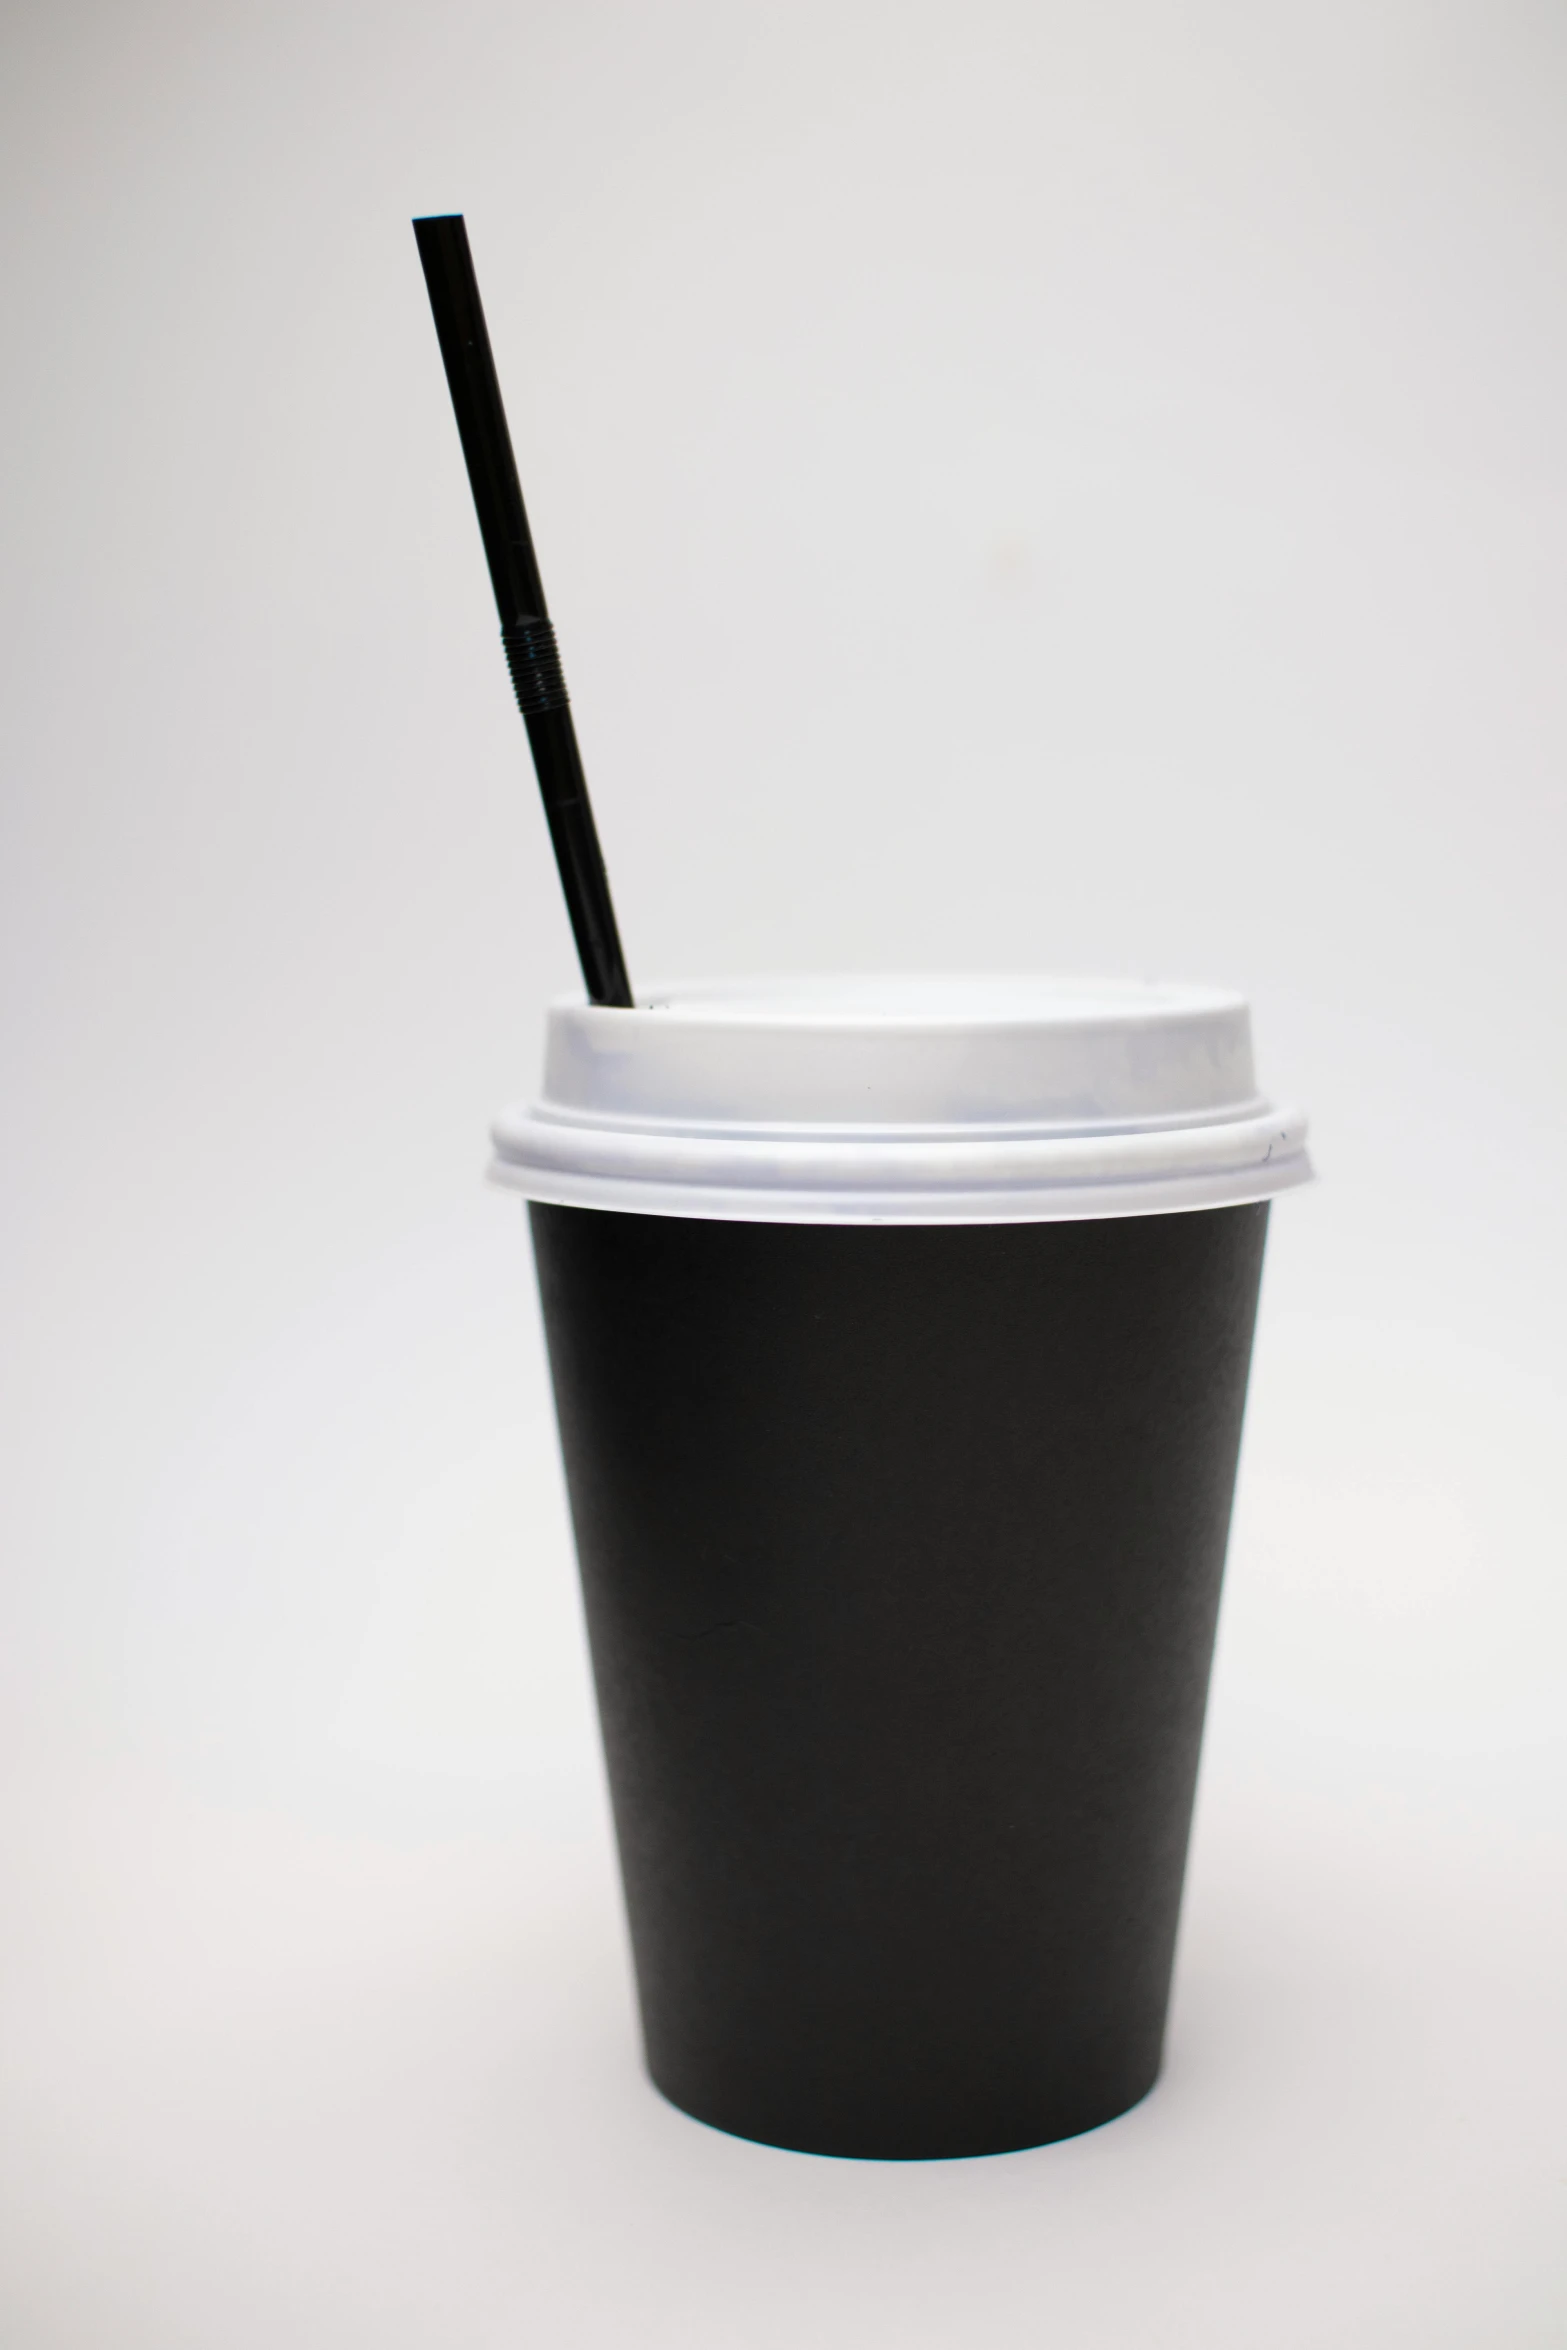 a cup with a lid and a black straw sticking out of it